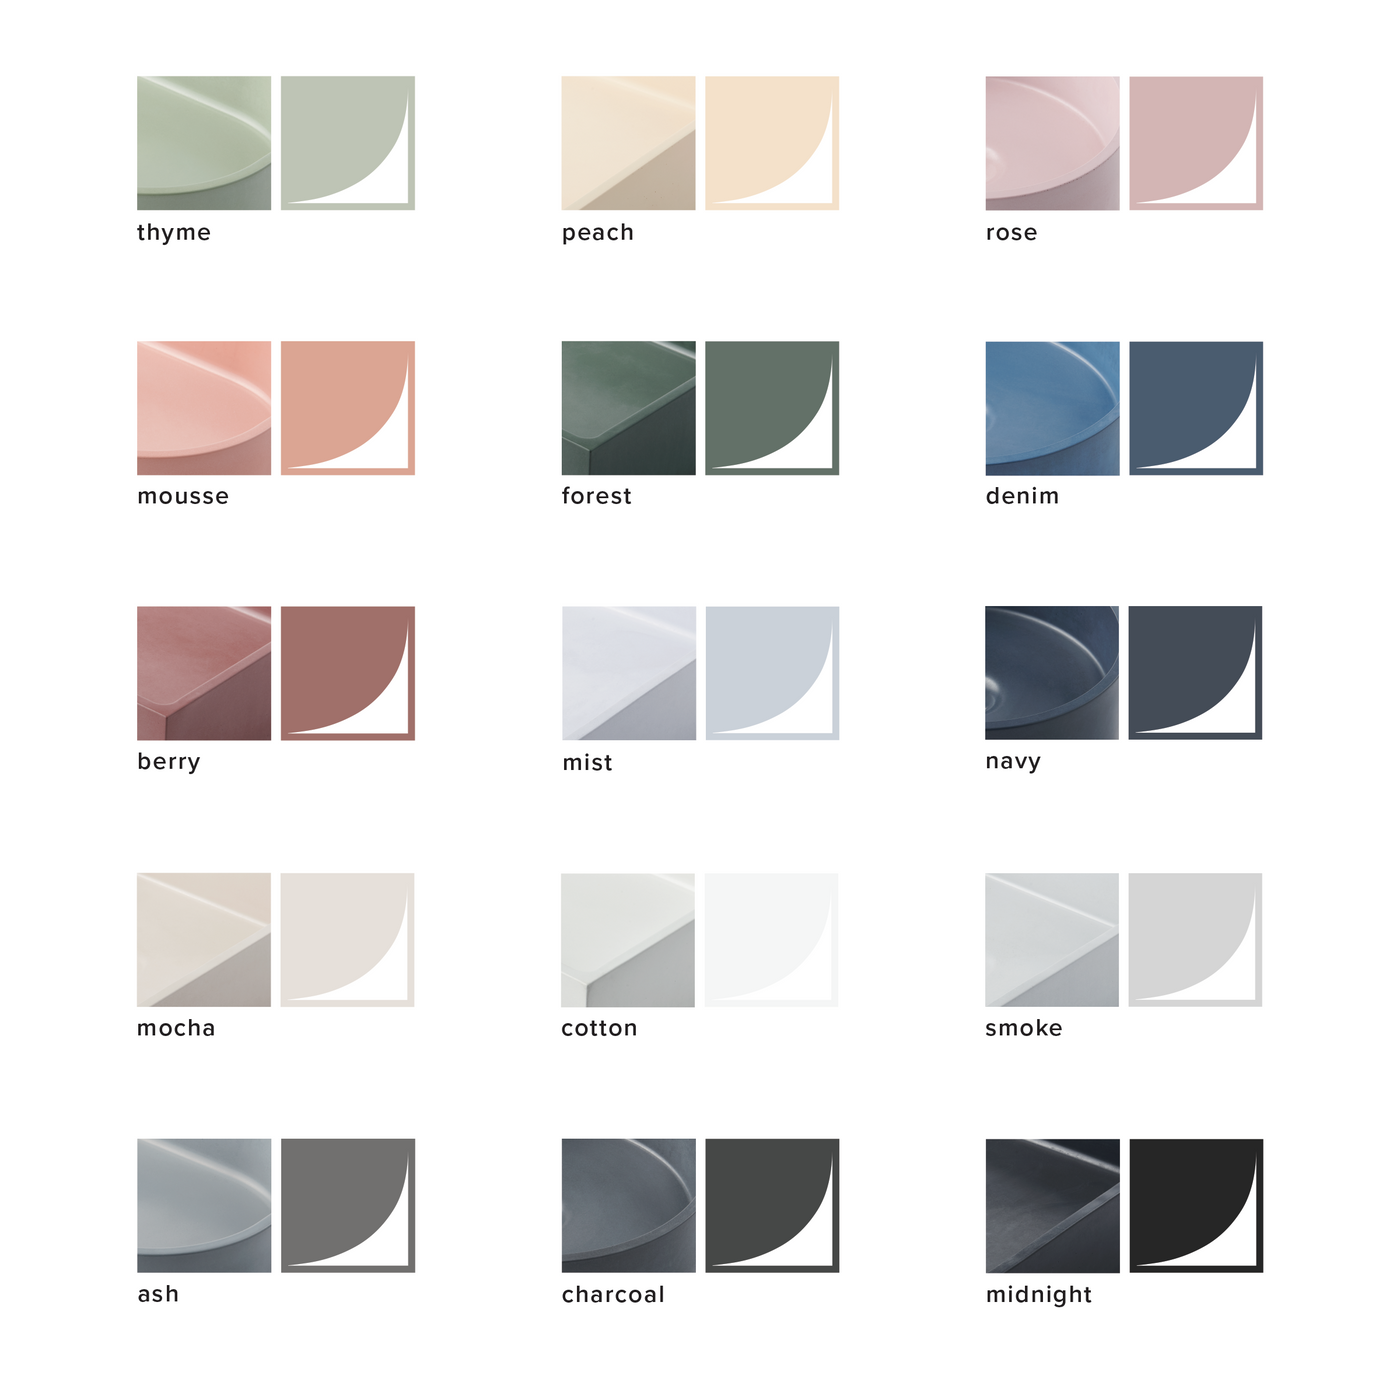 A bunch of different shades of different colors from mudd. concrete's Odet Basin SM Affix.